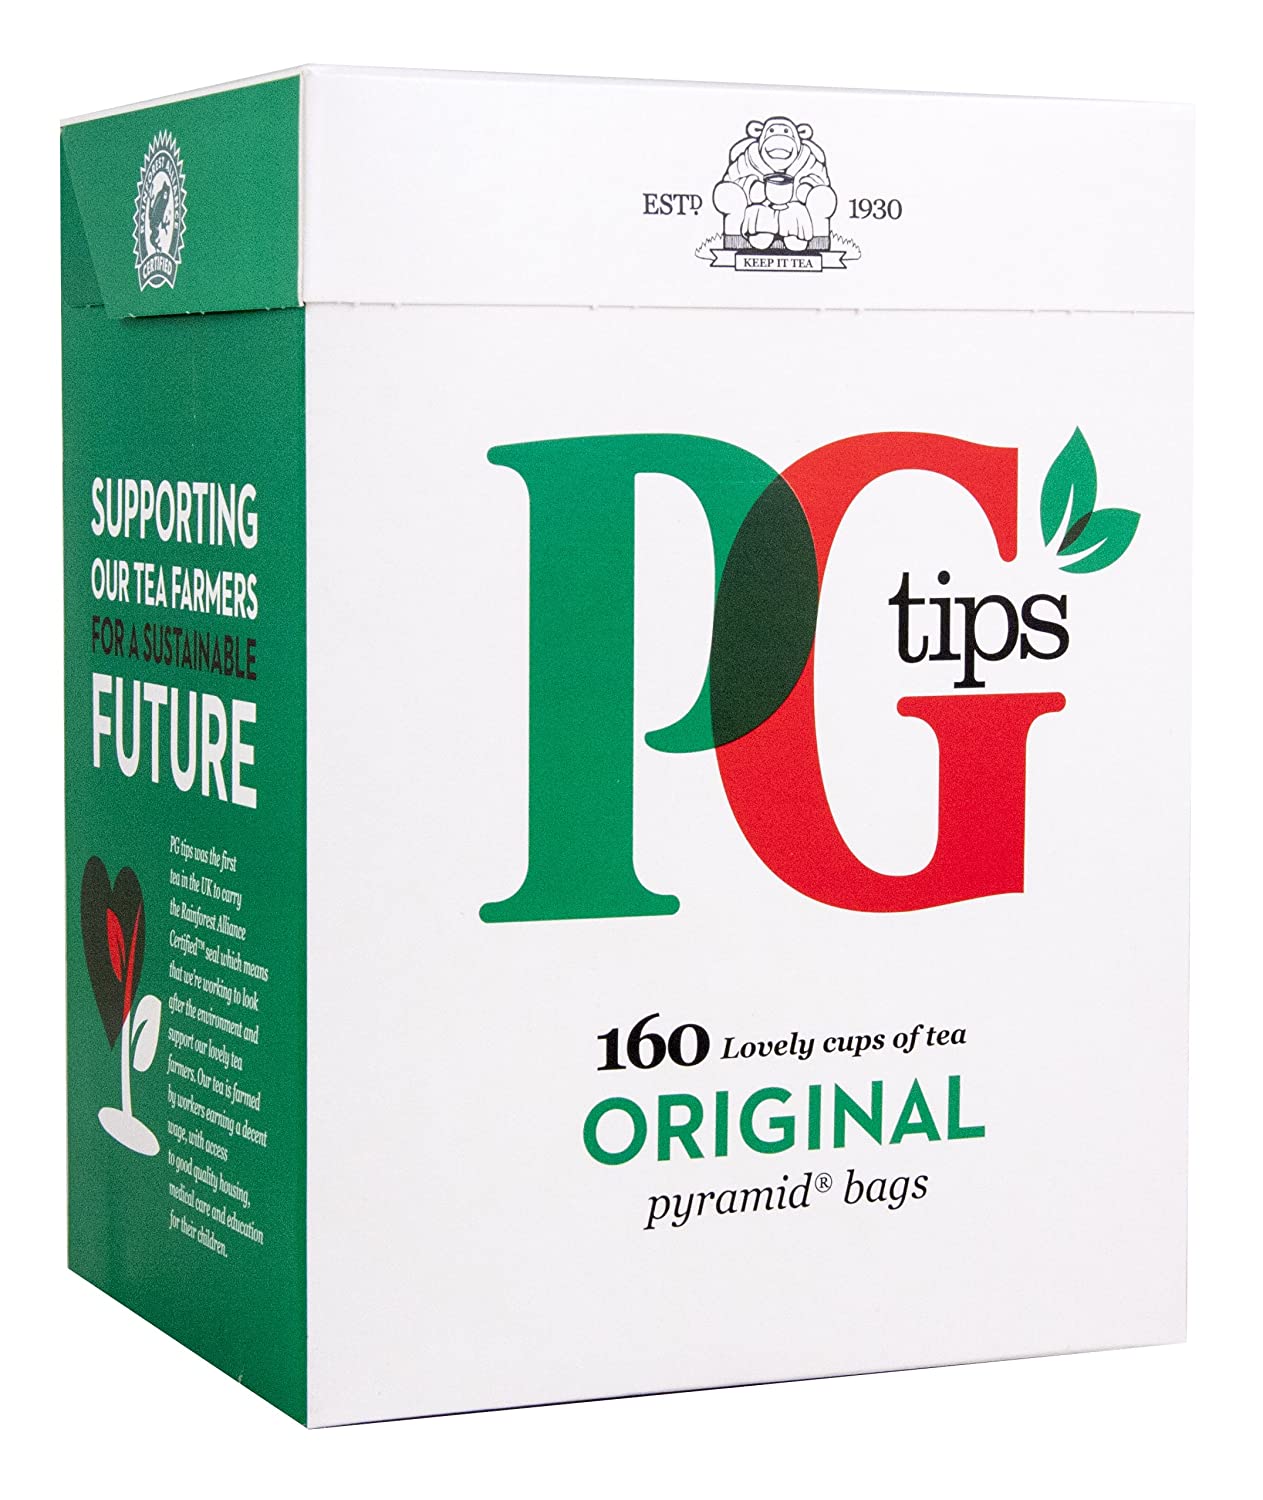 PG Tips Black Tea - Express Delivery in Switzerland